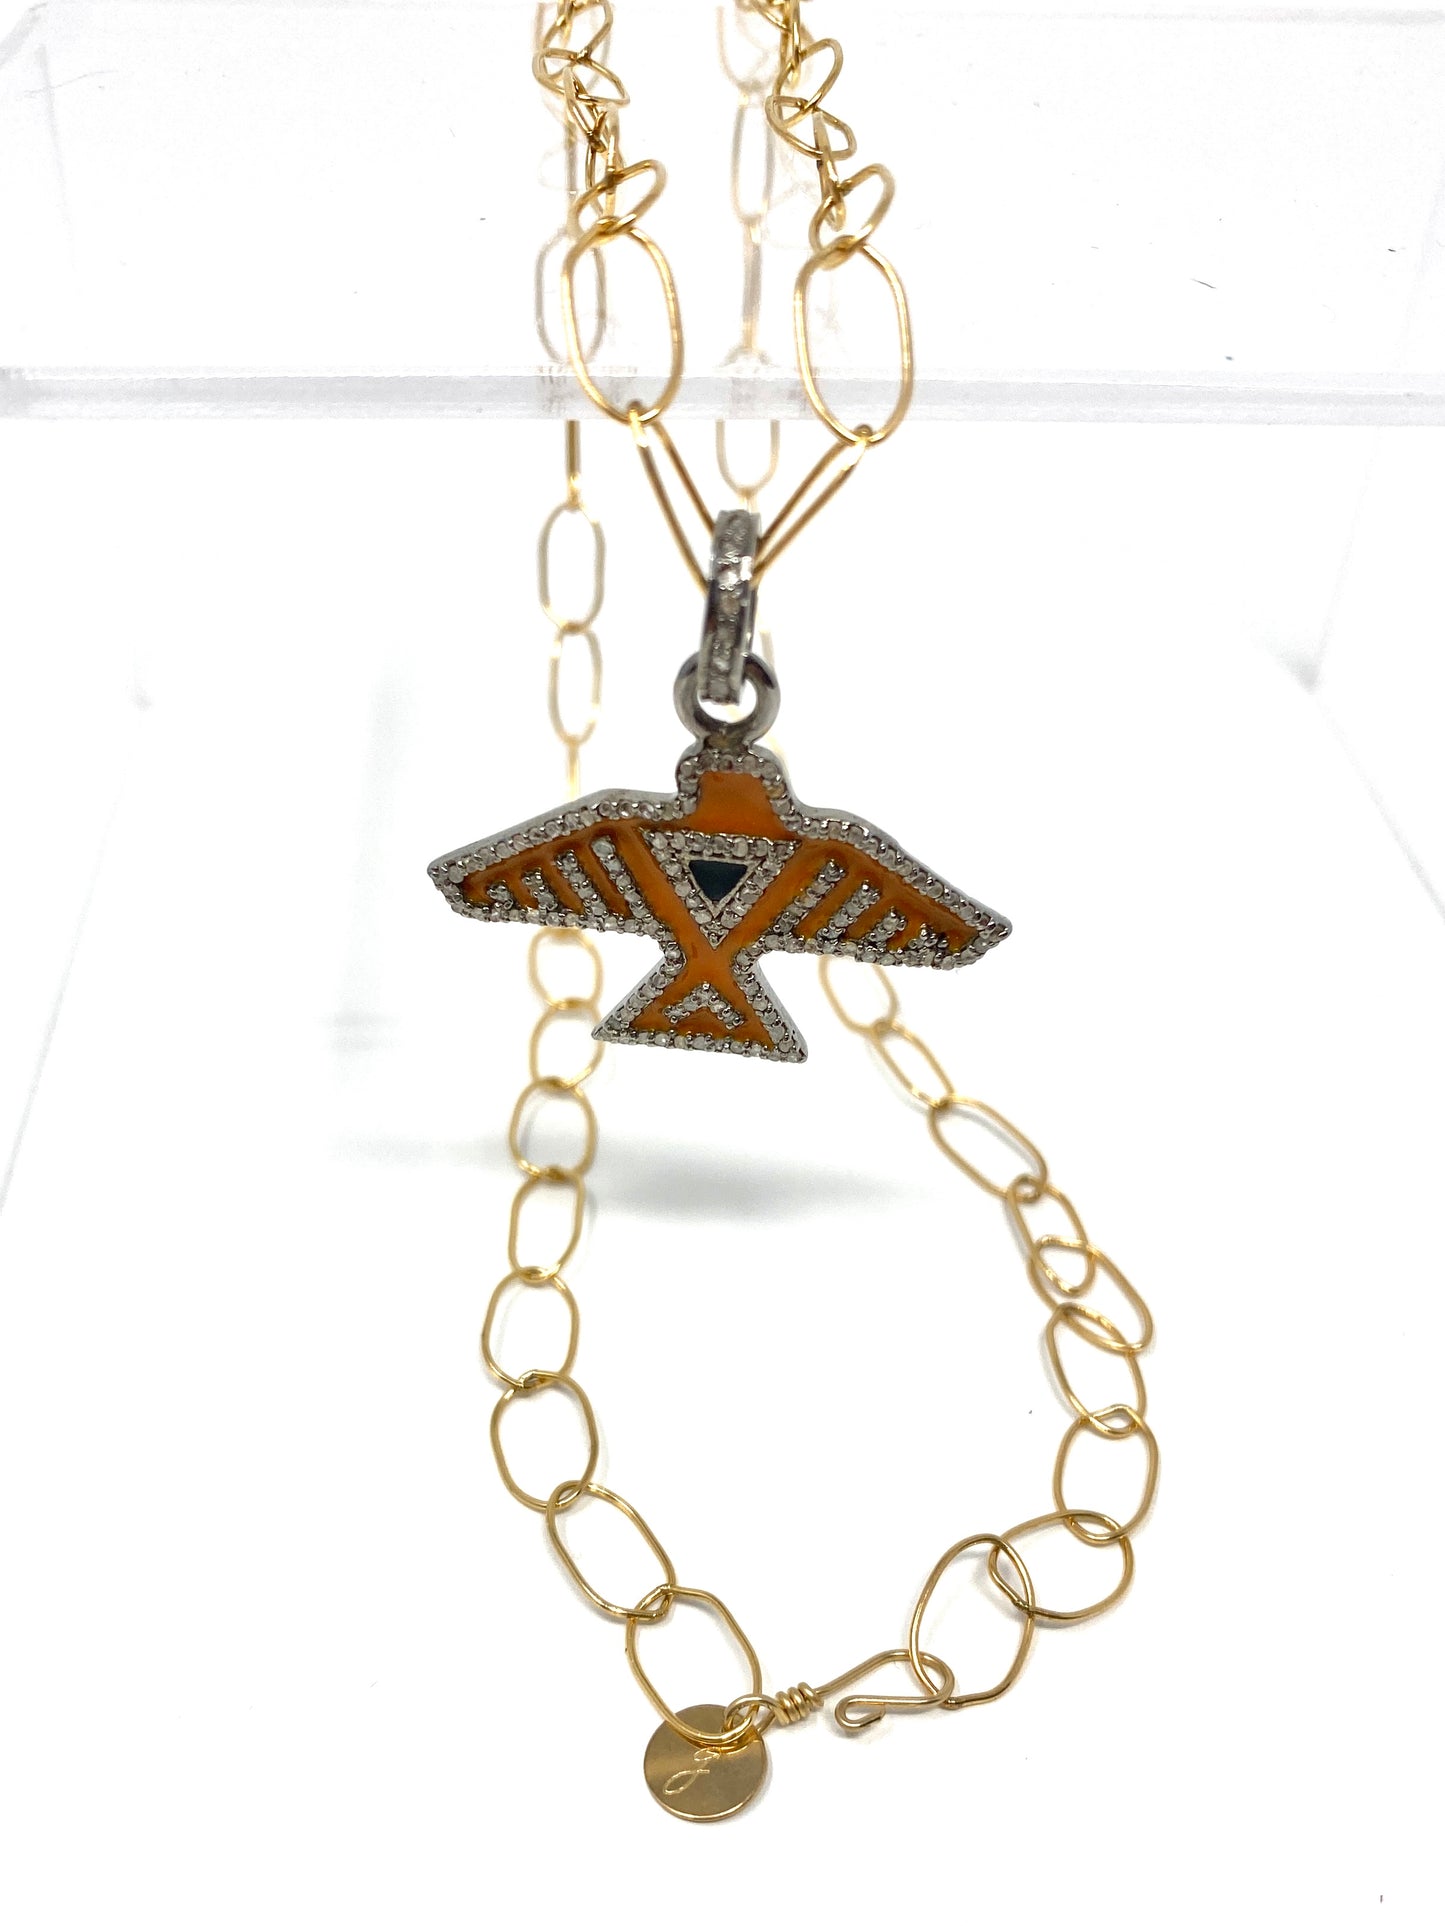 Gold Filled Chain Necklace With Orange Enamel and Diamond Thunderbird Pendant